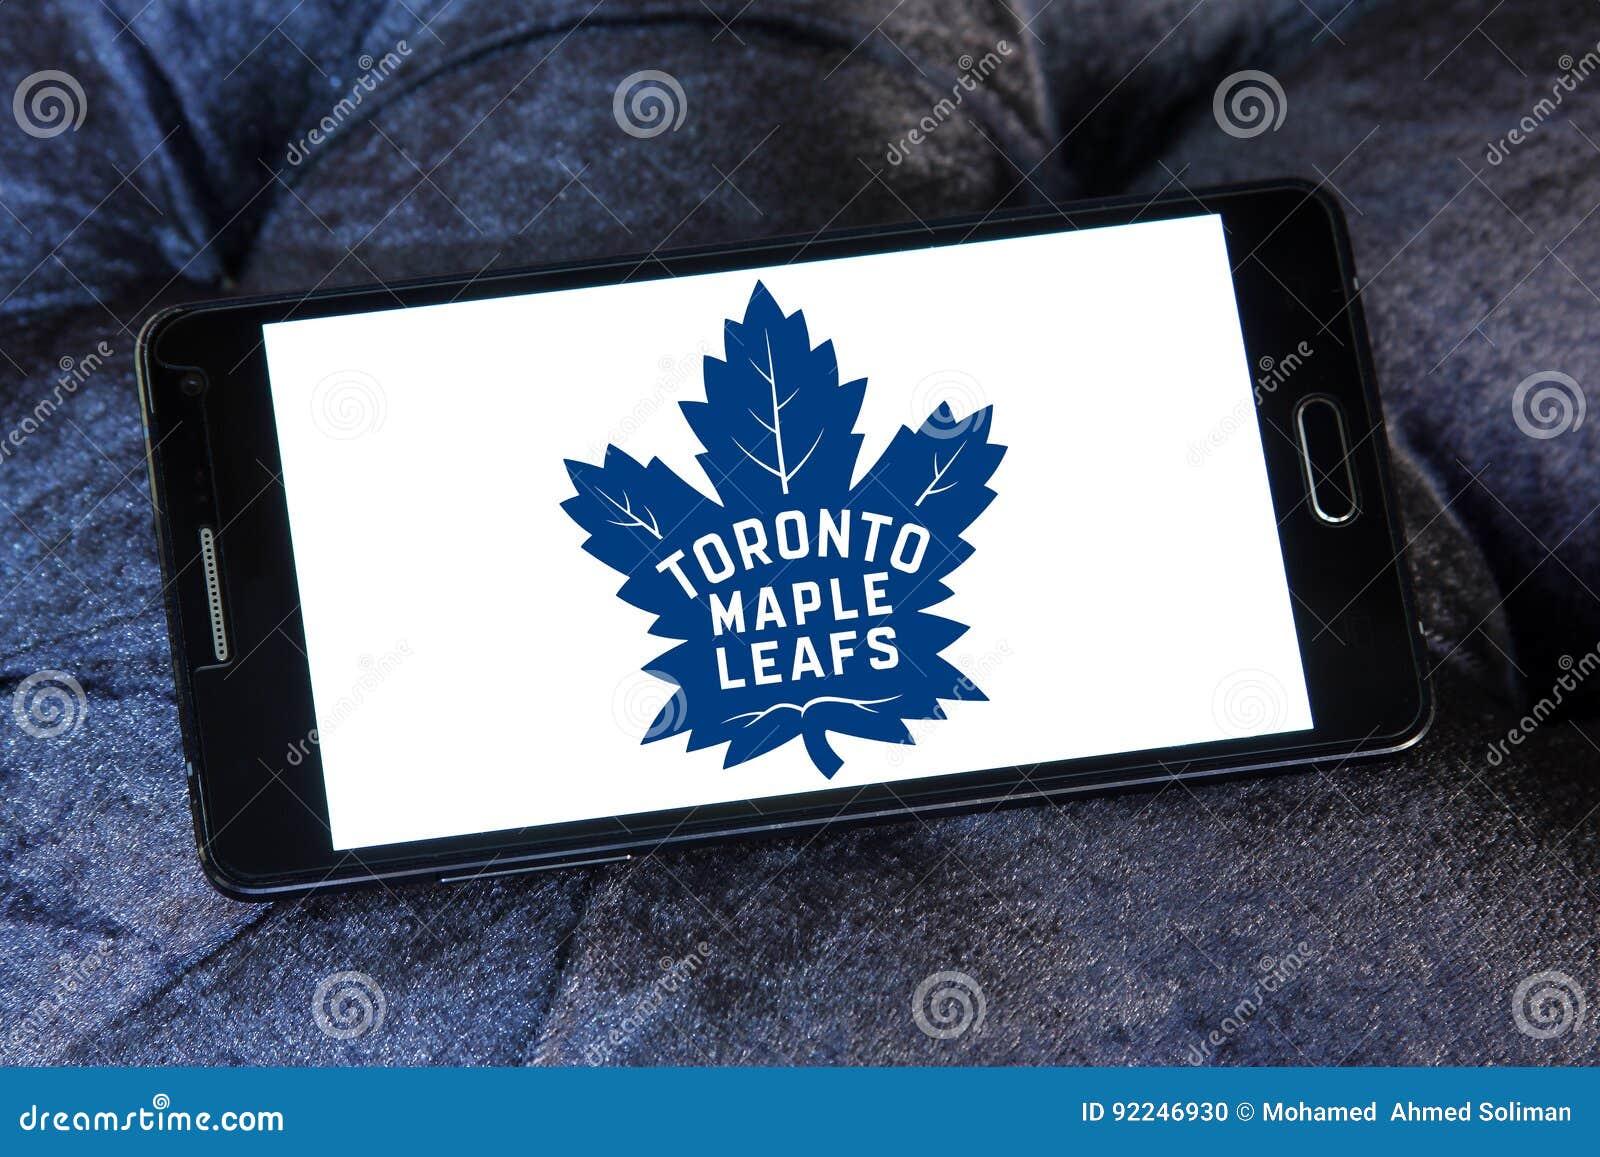 374 Leafs Logo Photos Free Royalty Free Stock Photos From Dreamstime